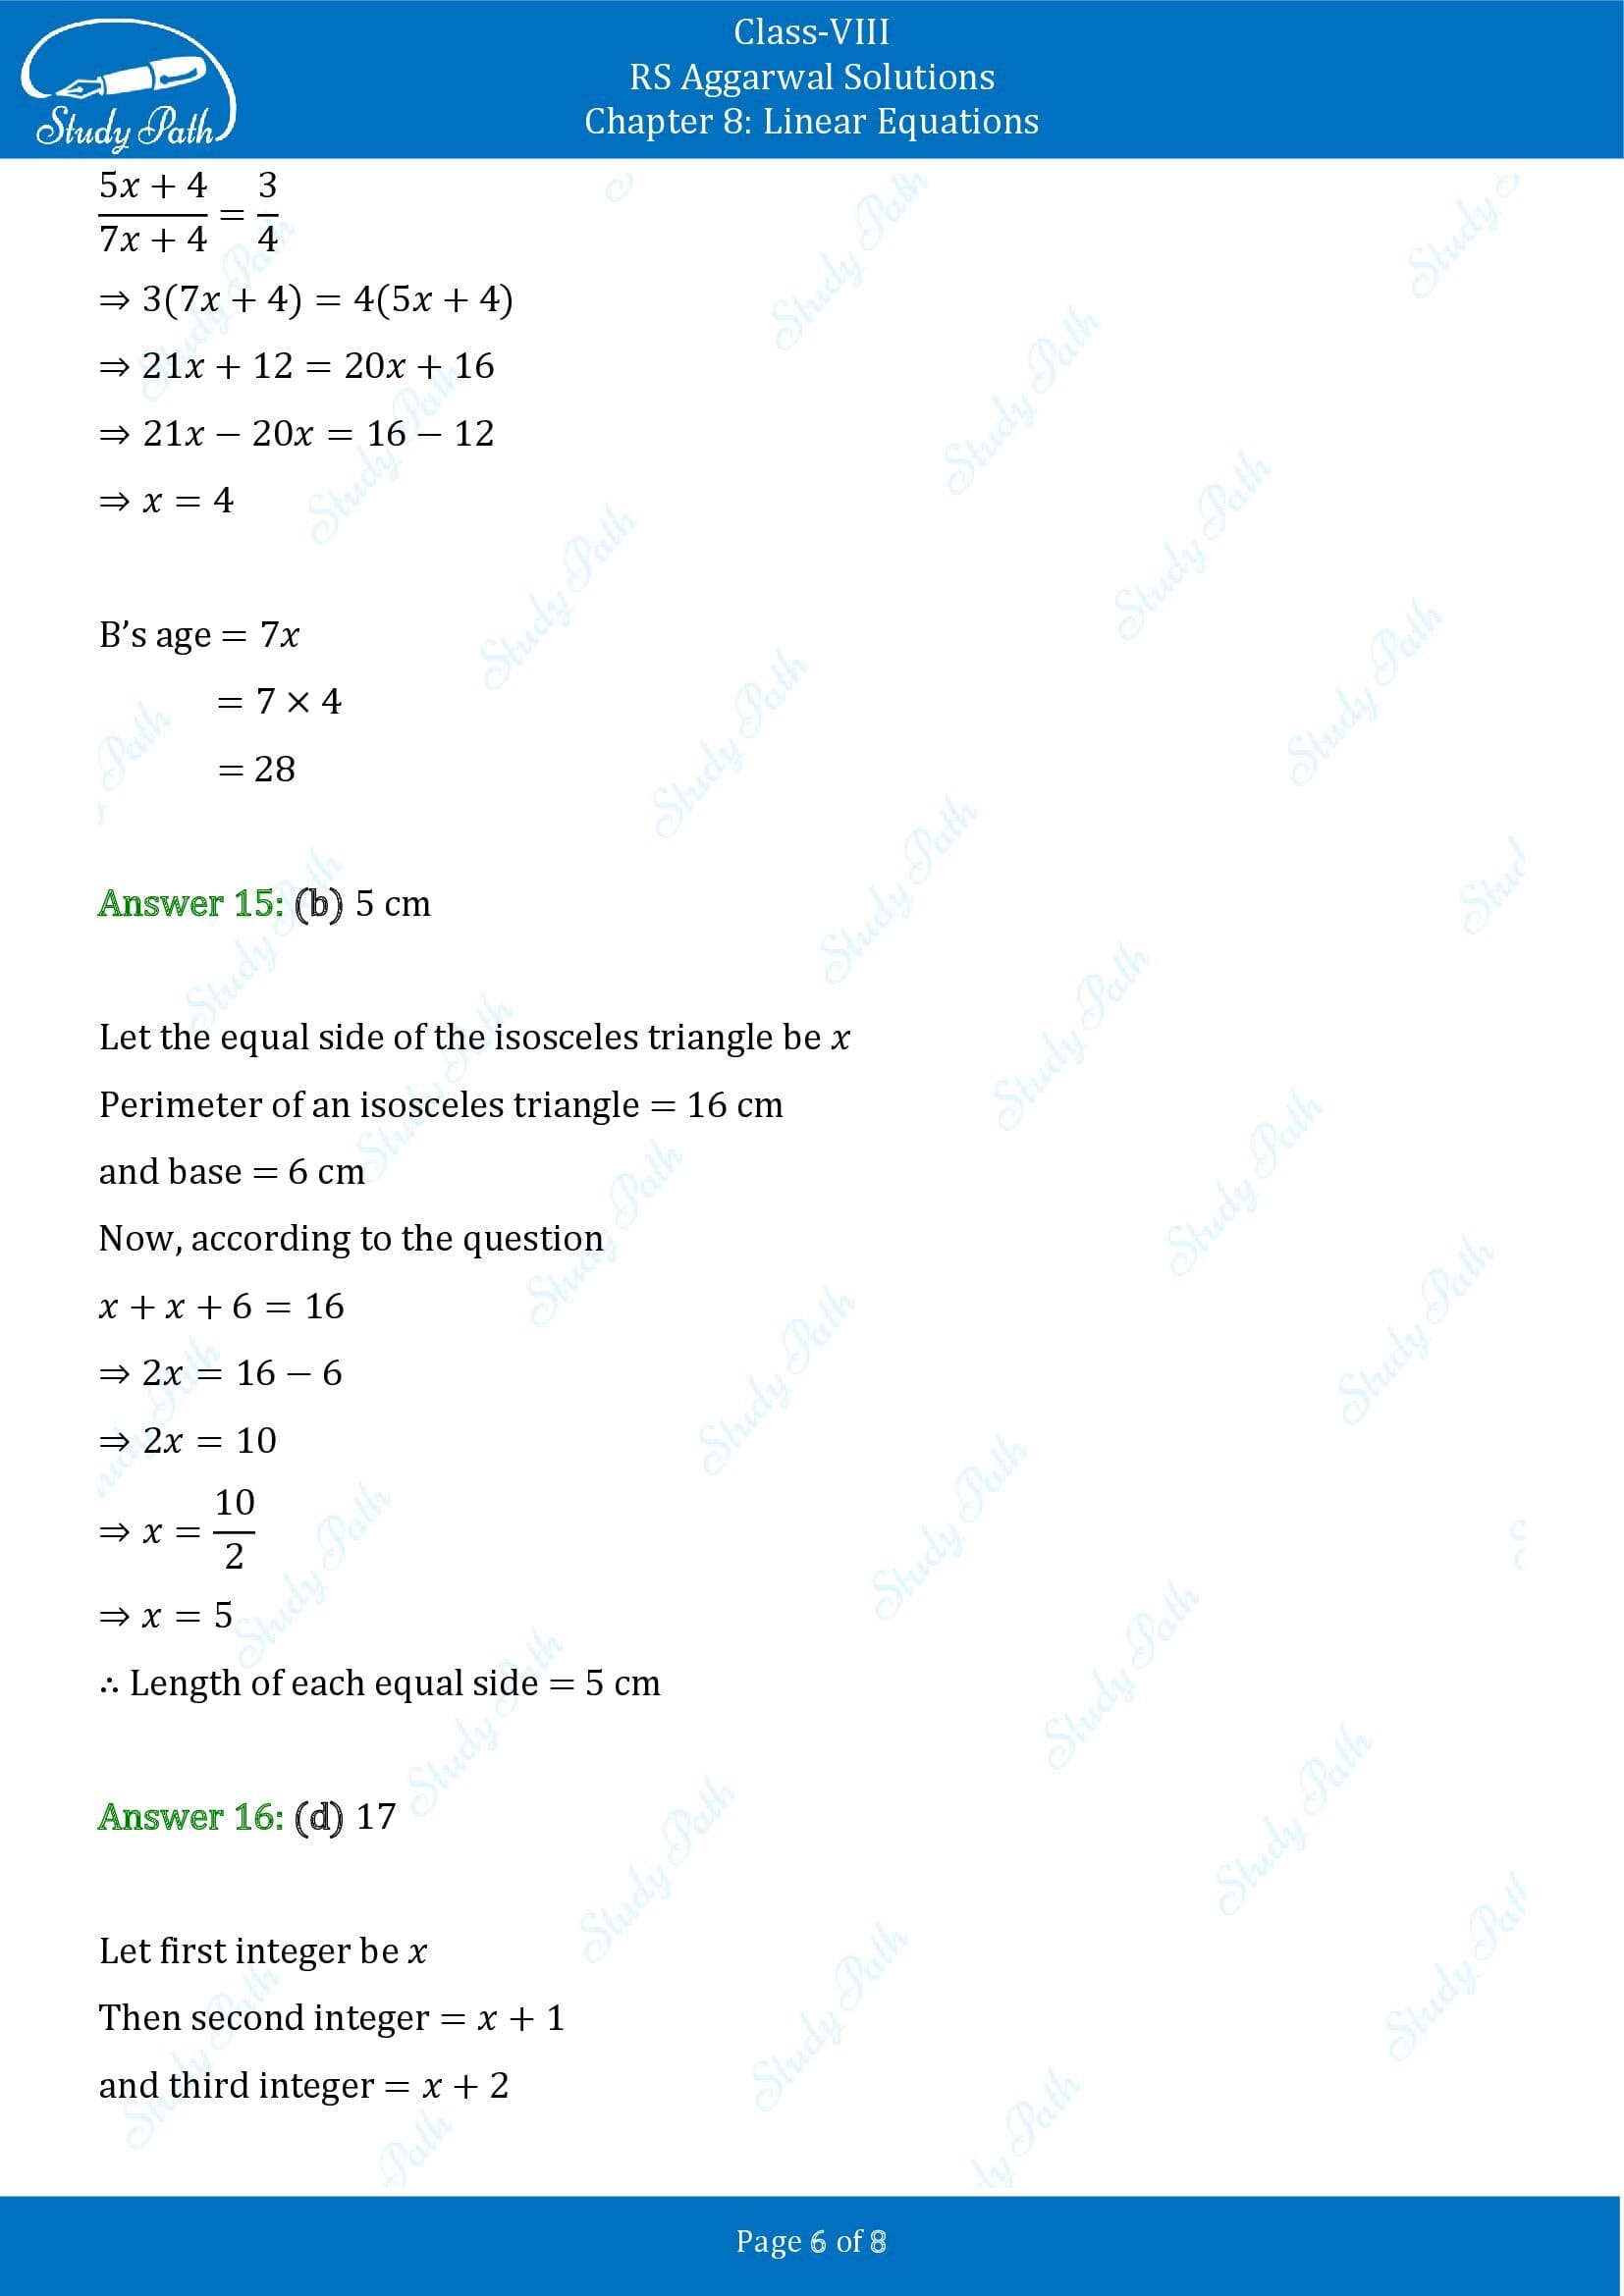 RS Aggarwal Solutions Class 8 Chapter 8 Linear Equations Exercise 8C MCQs 00006